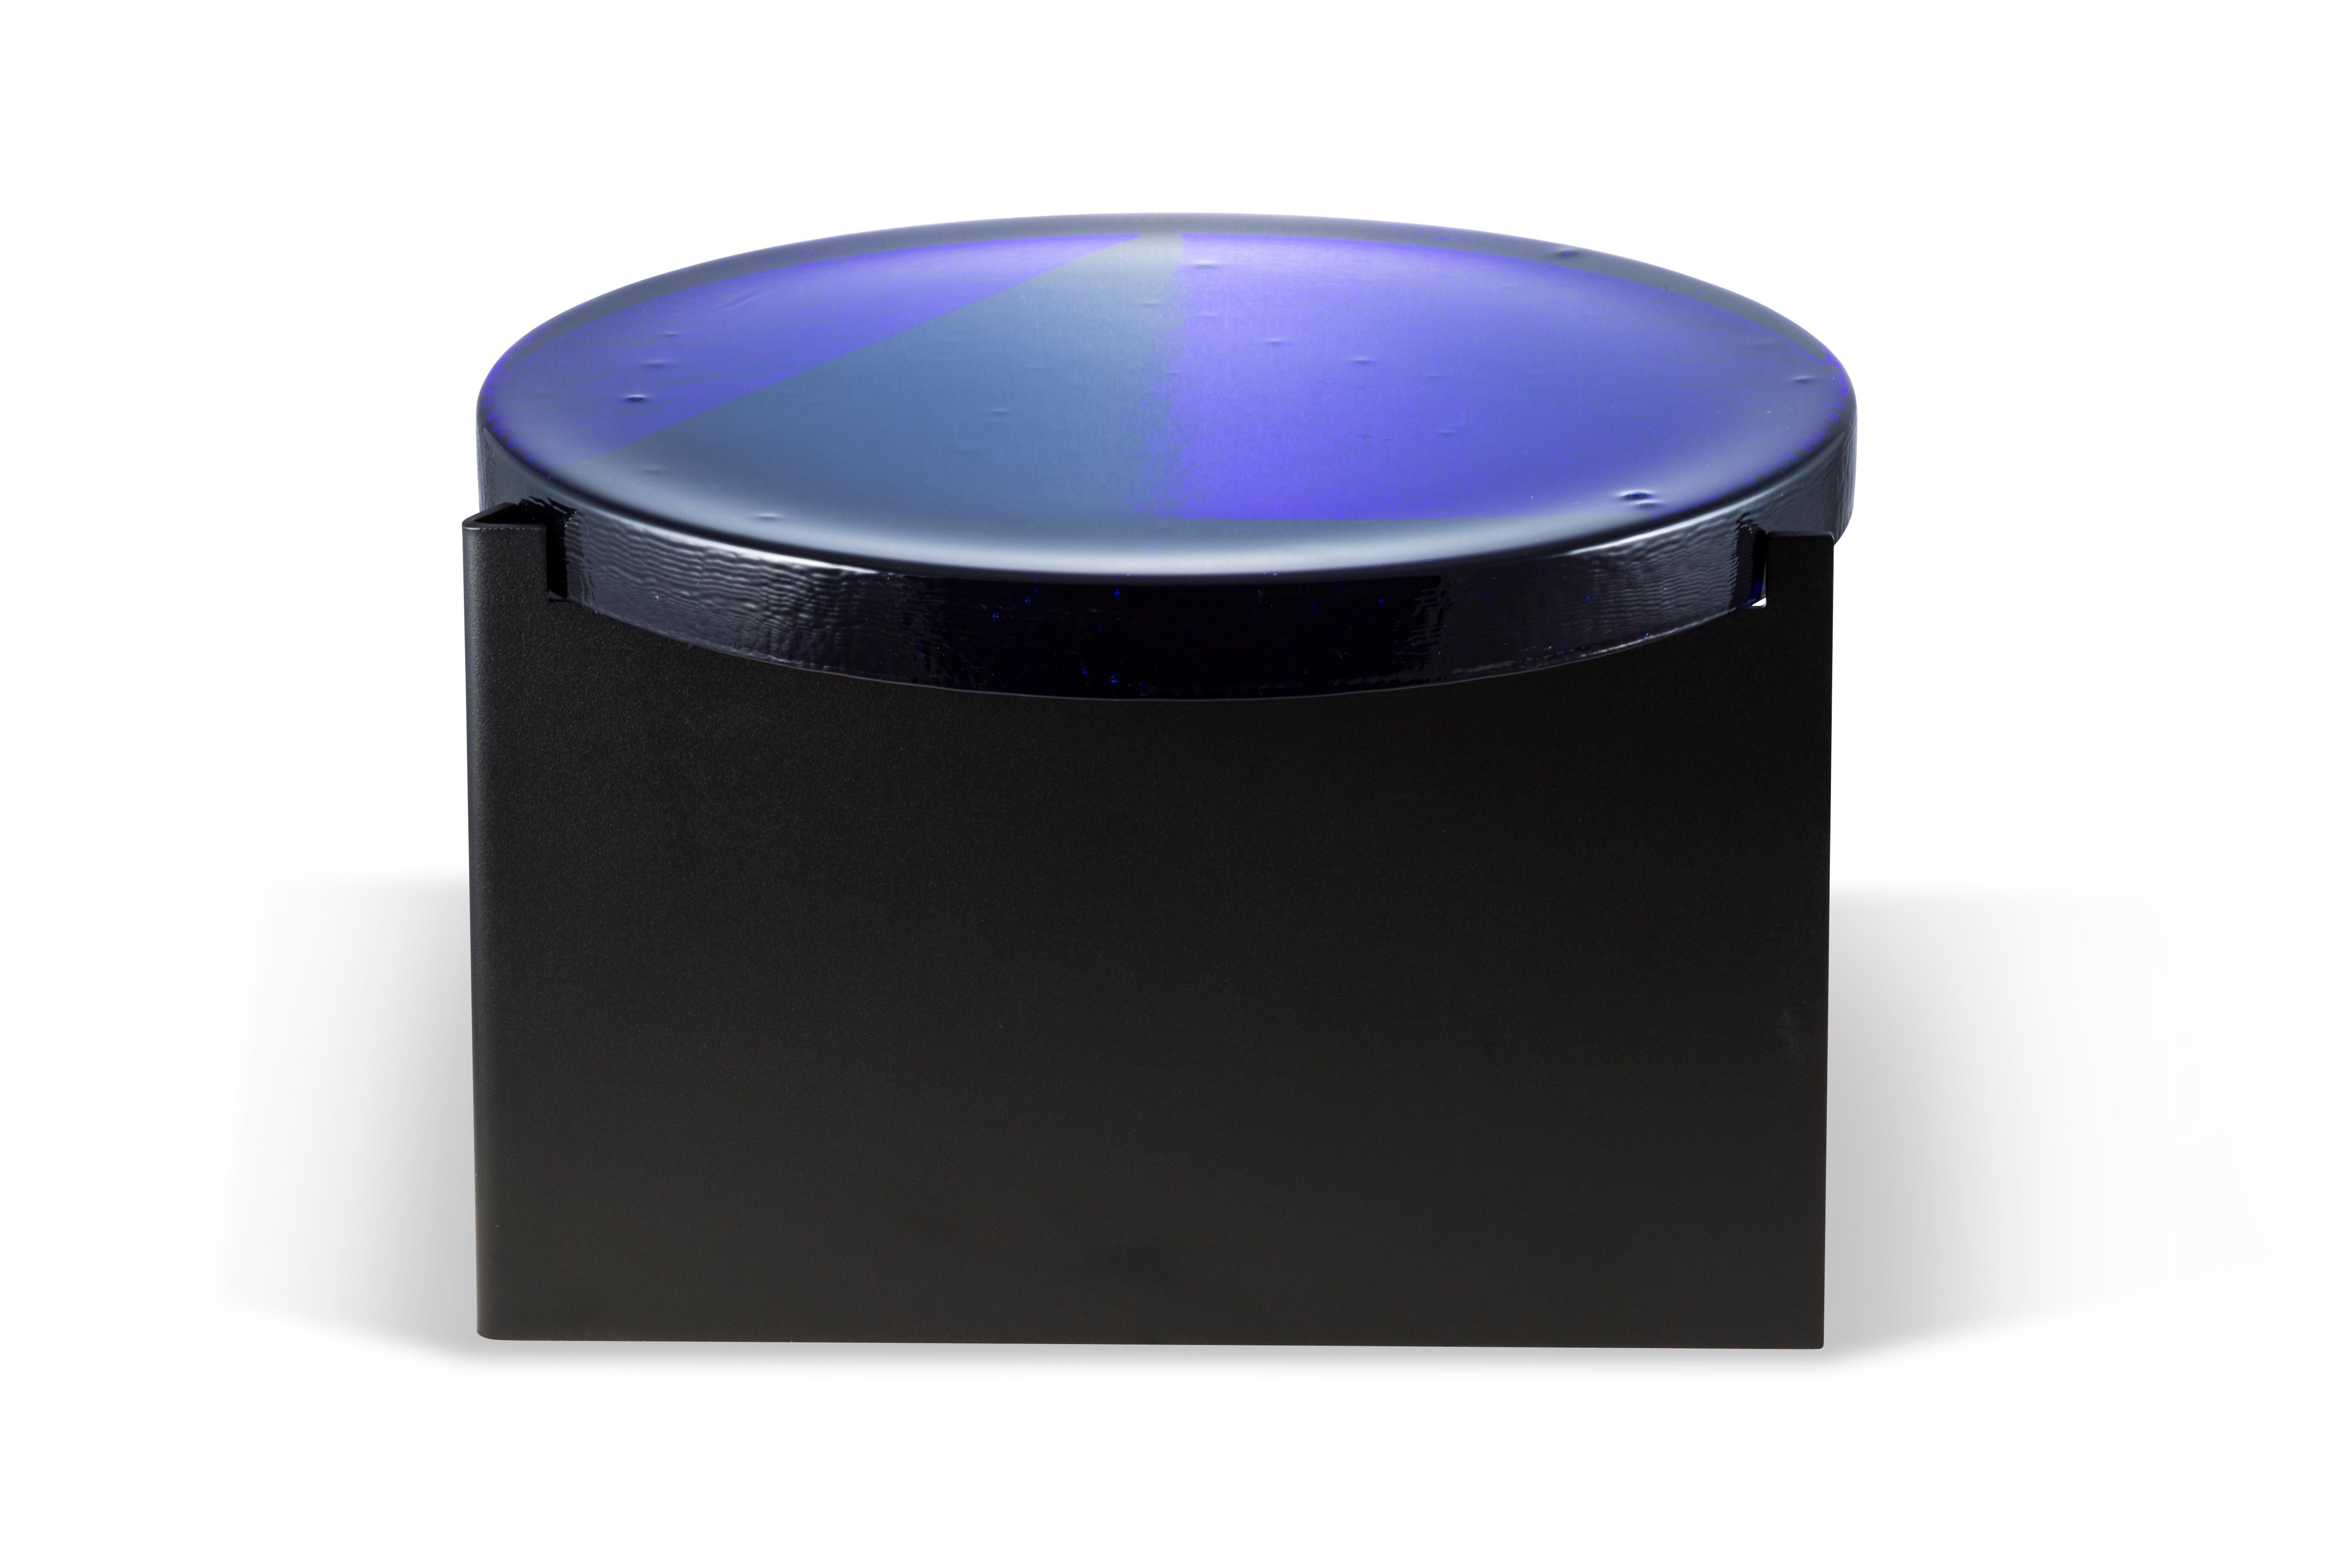 Alwa one big blue black coffee table by Pulpo.
Dimensions: D56 x H35 cm.
Materials: casted glass; powder coated steel.

Also available in different finishes. 

Normally, glass is regarded as being lightweight with sharp edges. In contrast,